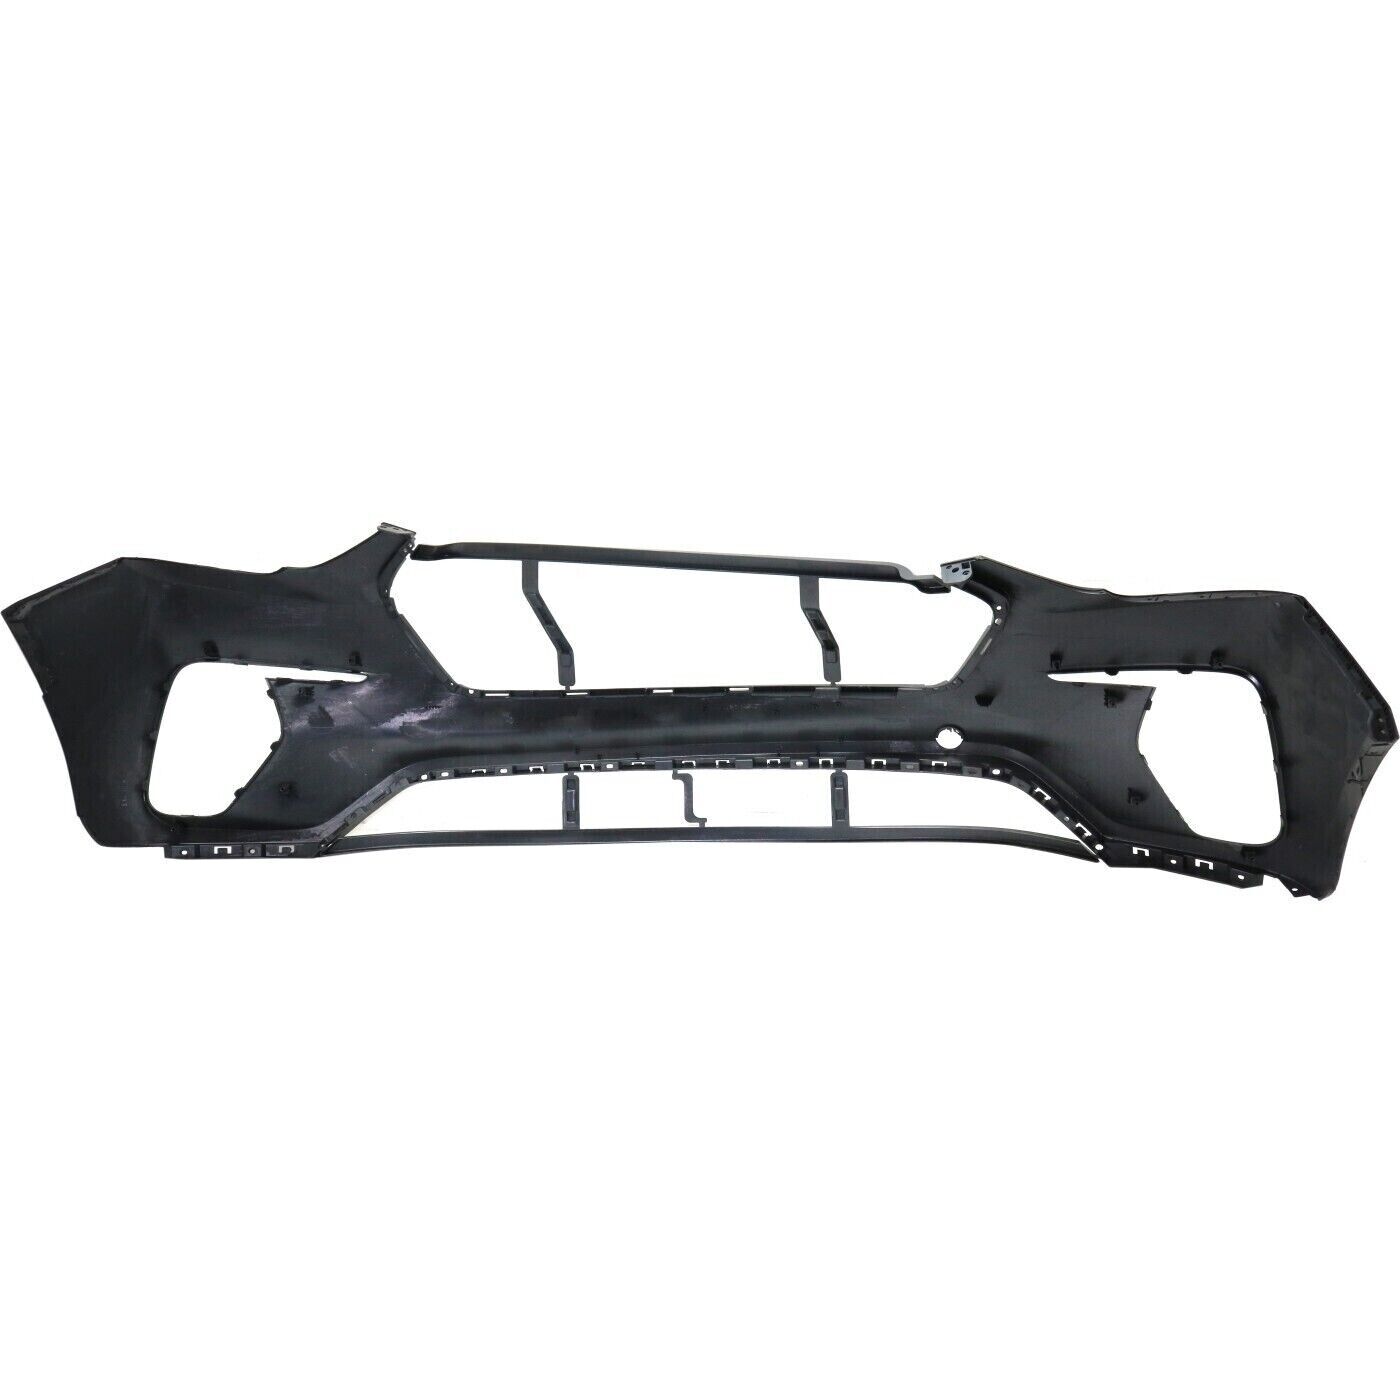 2017-2019 HYUNDAI Santa Fe; Front Bumper Cover; Exc SPORT Painted to Match